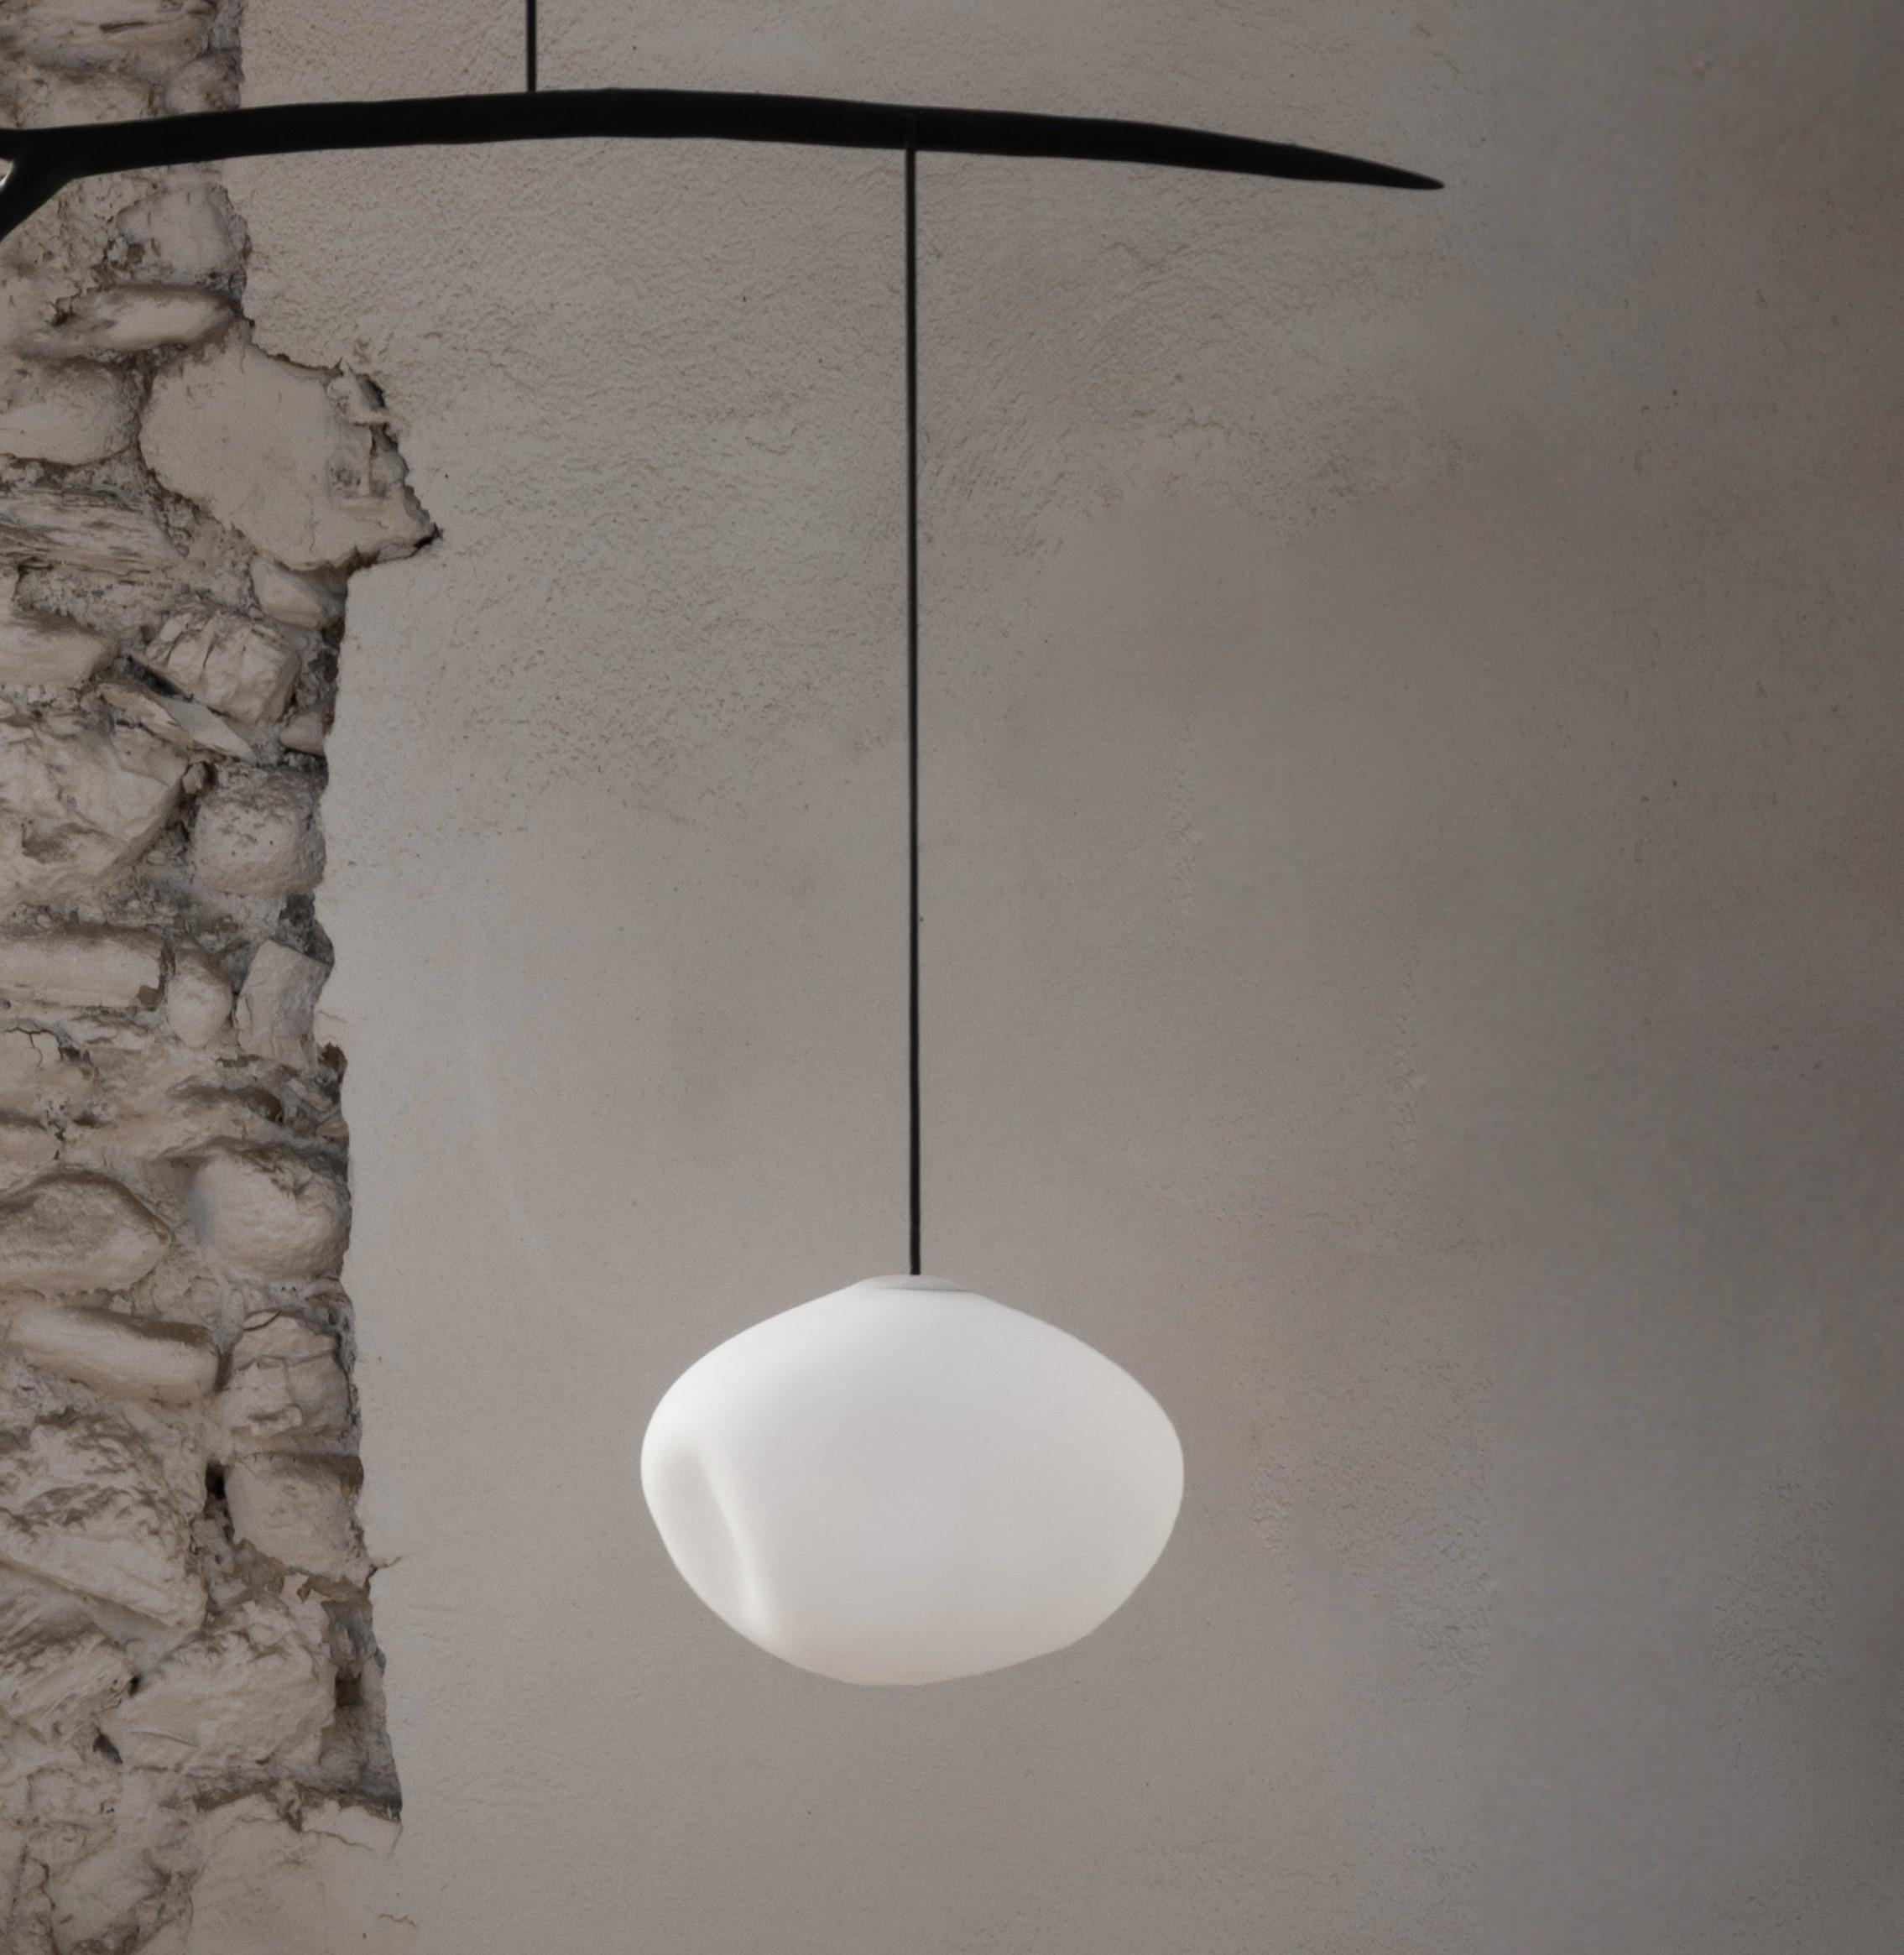 Organic Modern Icarus Suspension Lamp by Jérôme Pereira  For Sale